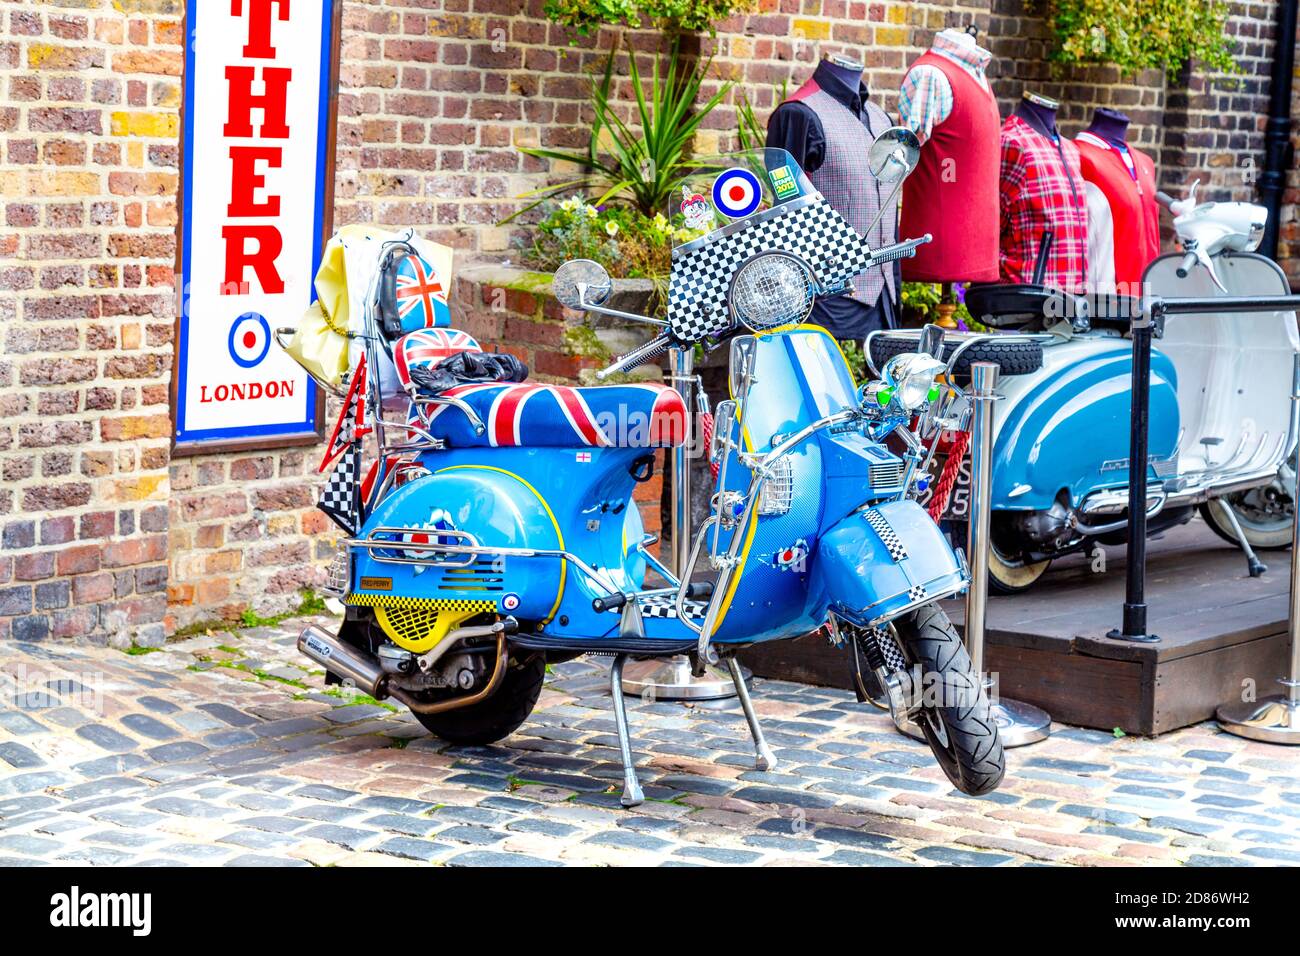 Mod scooter outside of Modfather shop in Camden Stables Market, London, UK Stock Photo